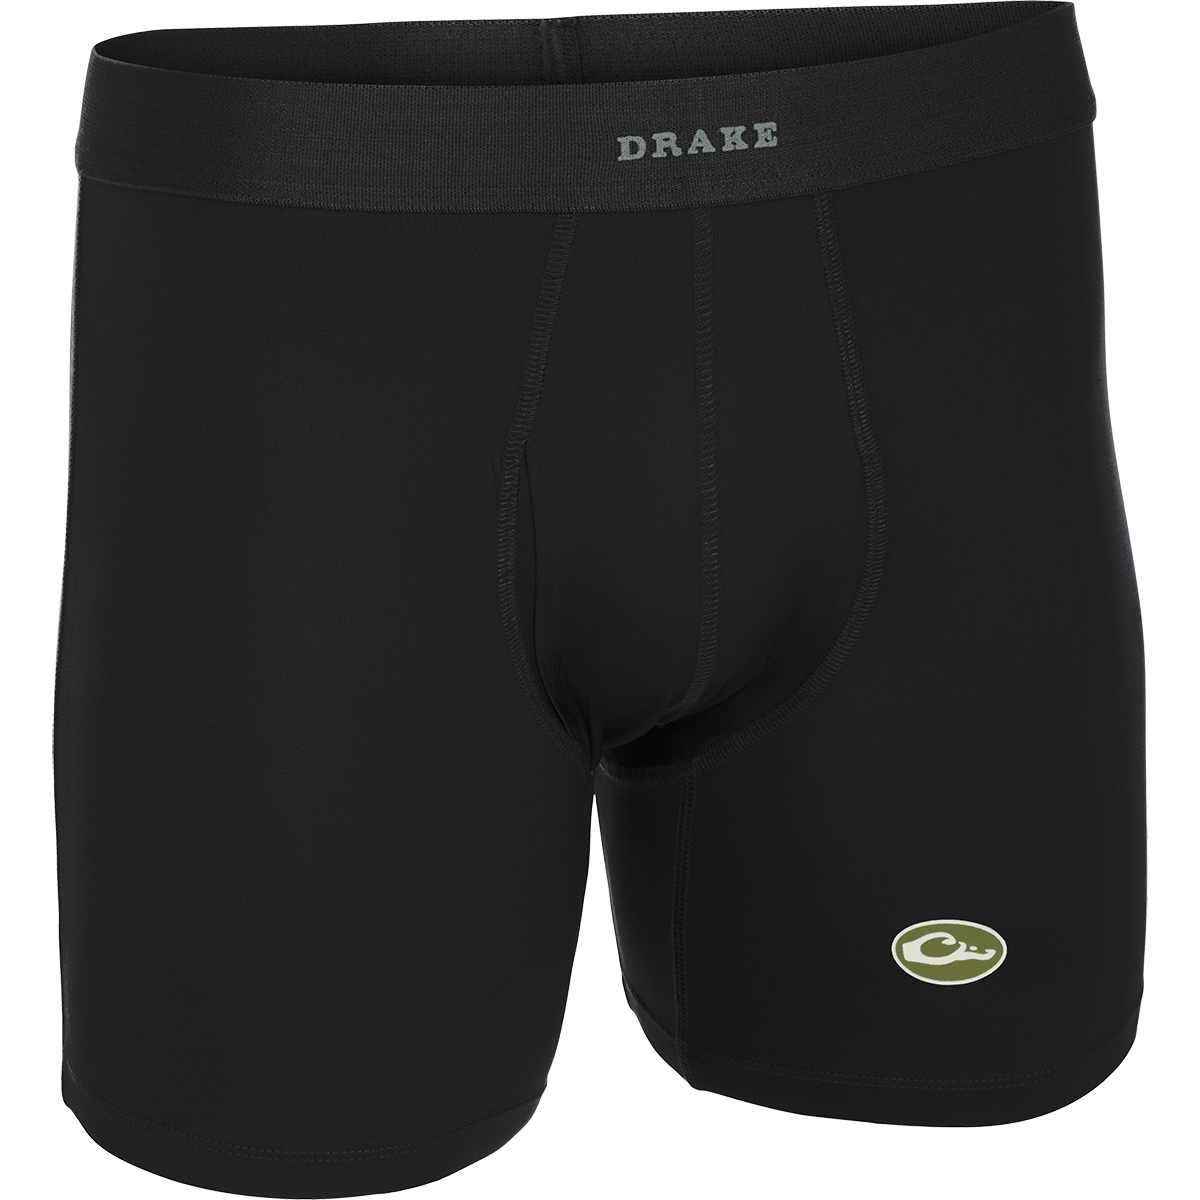 Mens Underwear  For the Commando in You – Frii Wilii